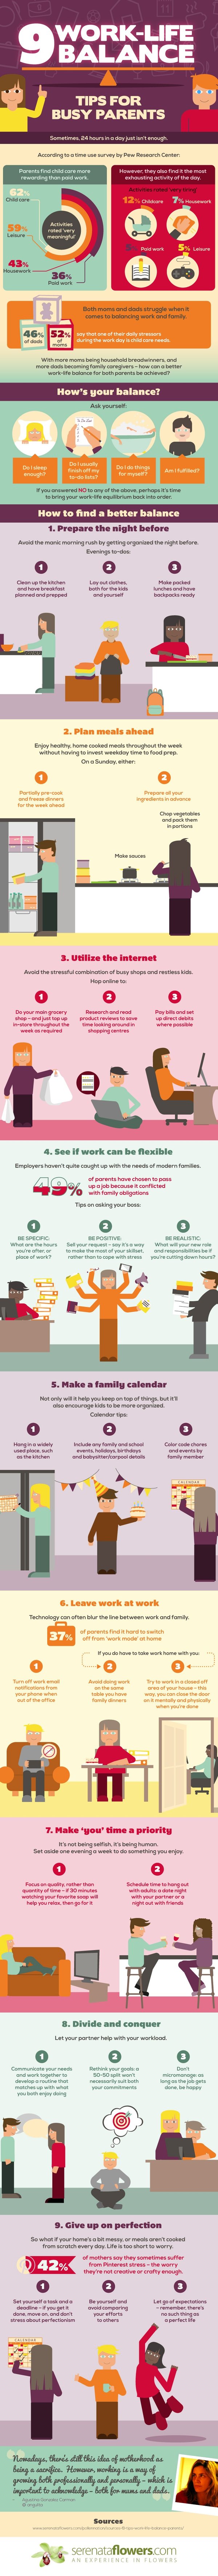 Work-Life Balance Hacks for Parents [Infographic] - by TINYpulse